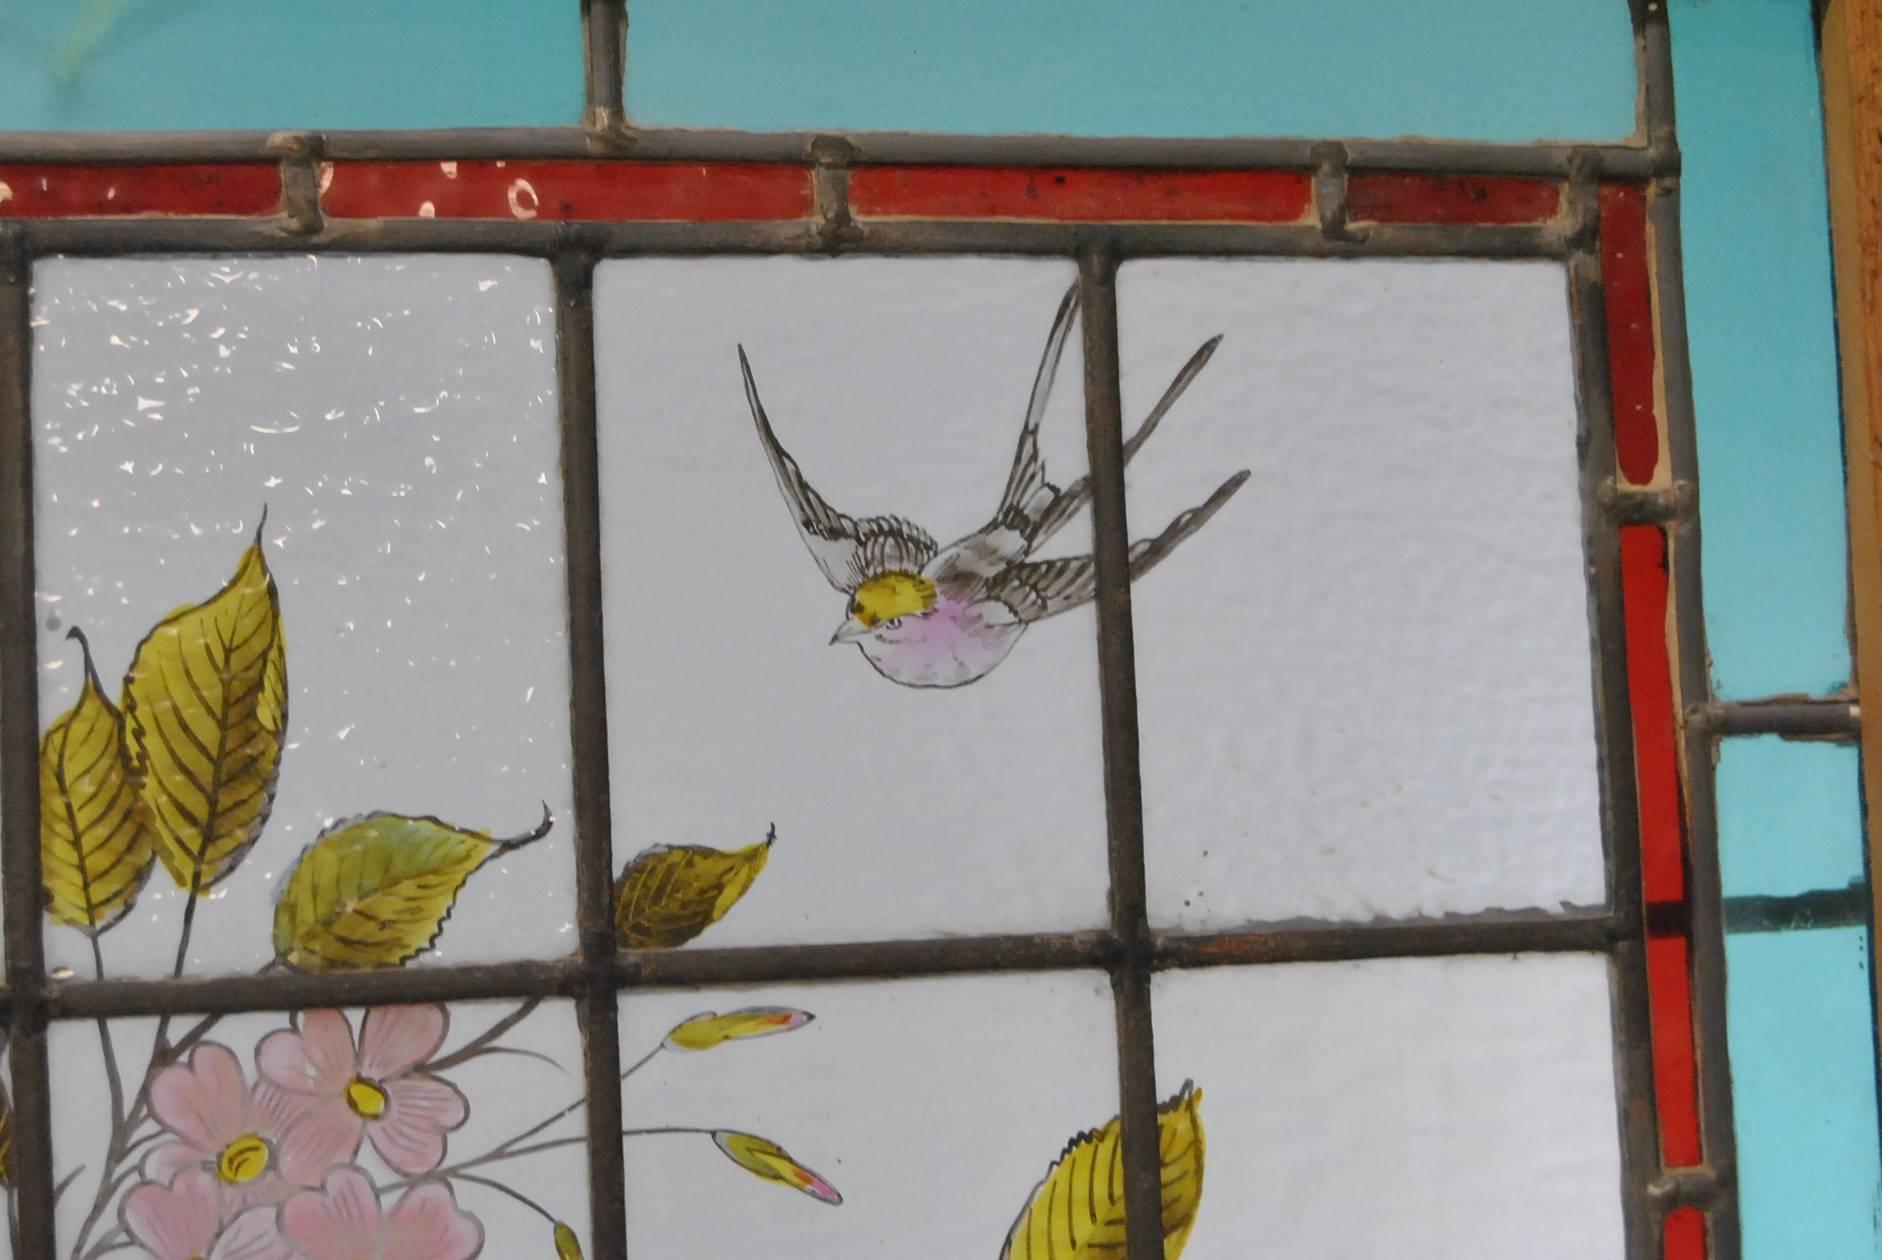 Late 19th Century Victorian Hand-Painted Stained Glass Window with Swallows and Dogwood Blossoms